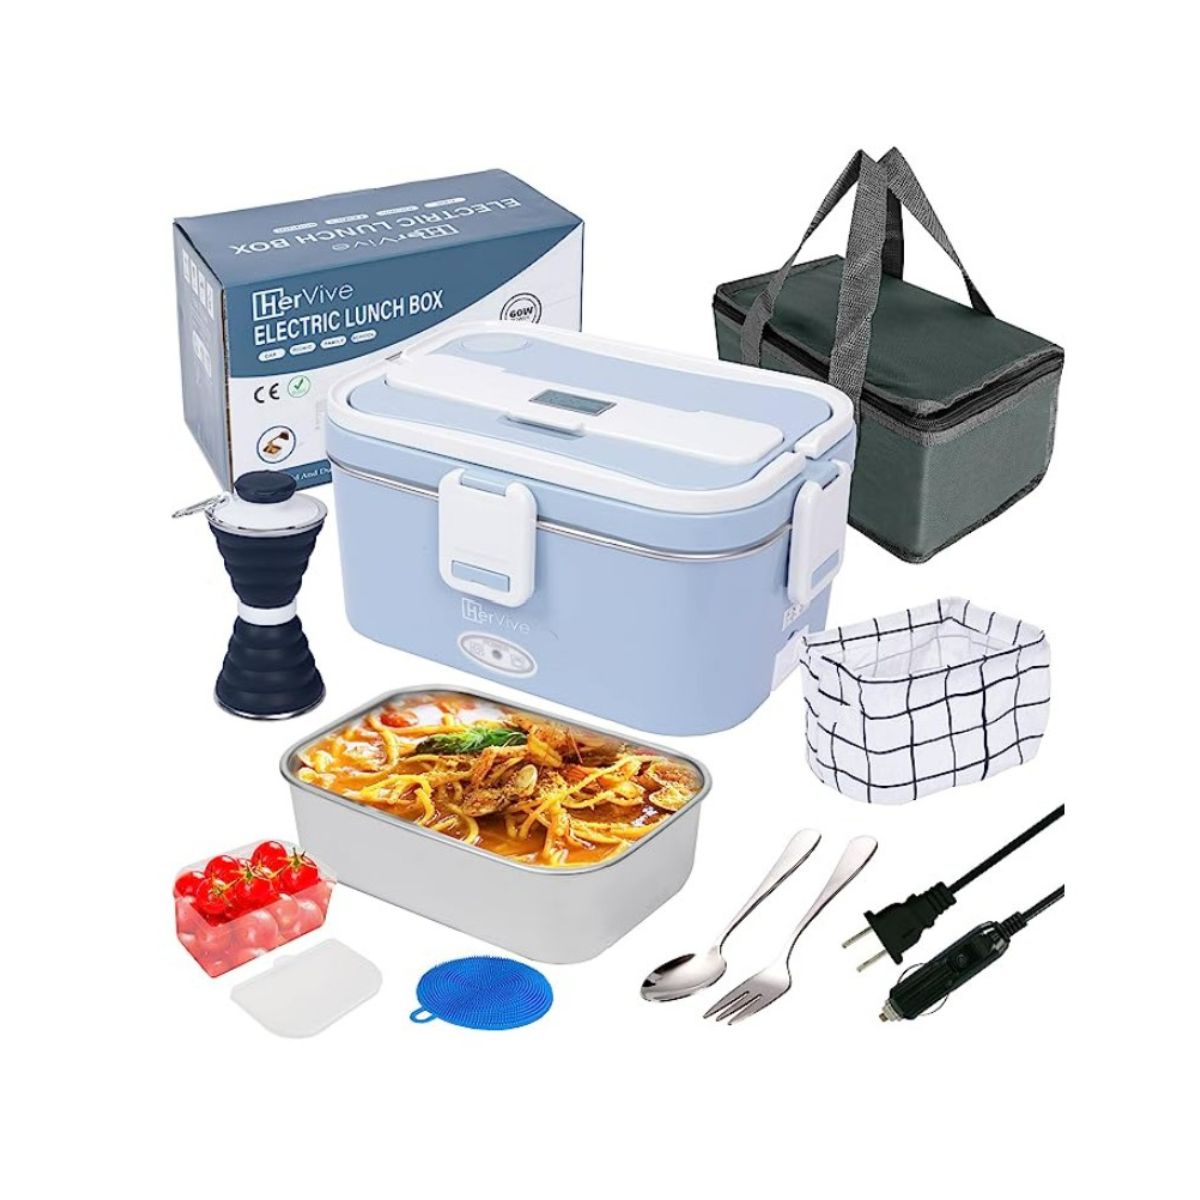 Blue electric lunch box with soup inside.